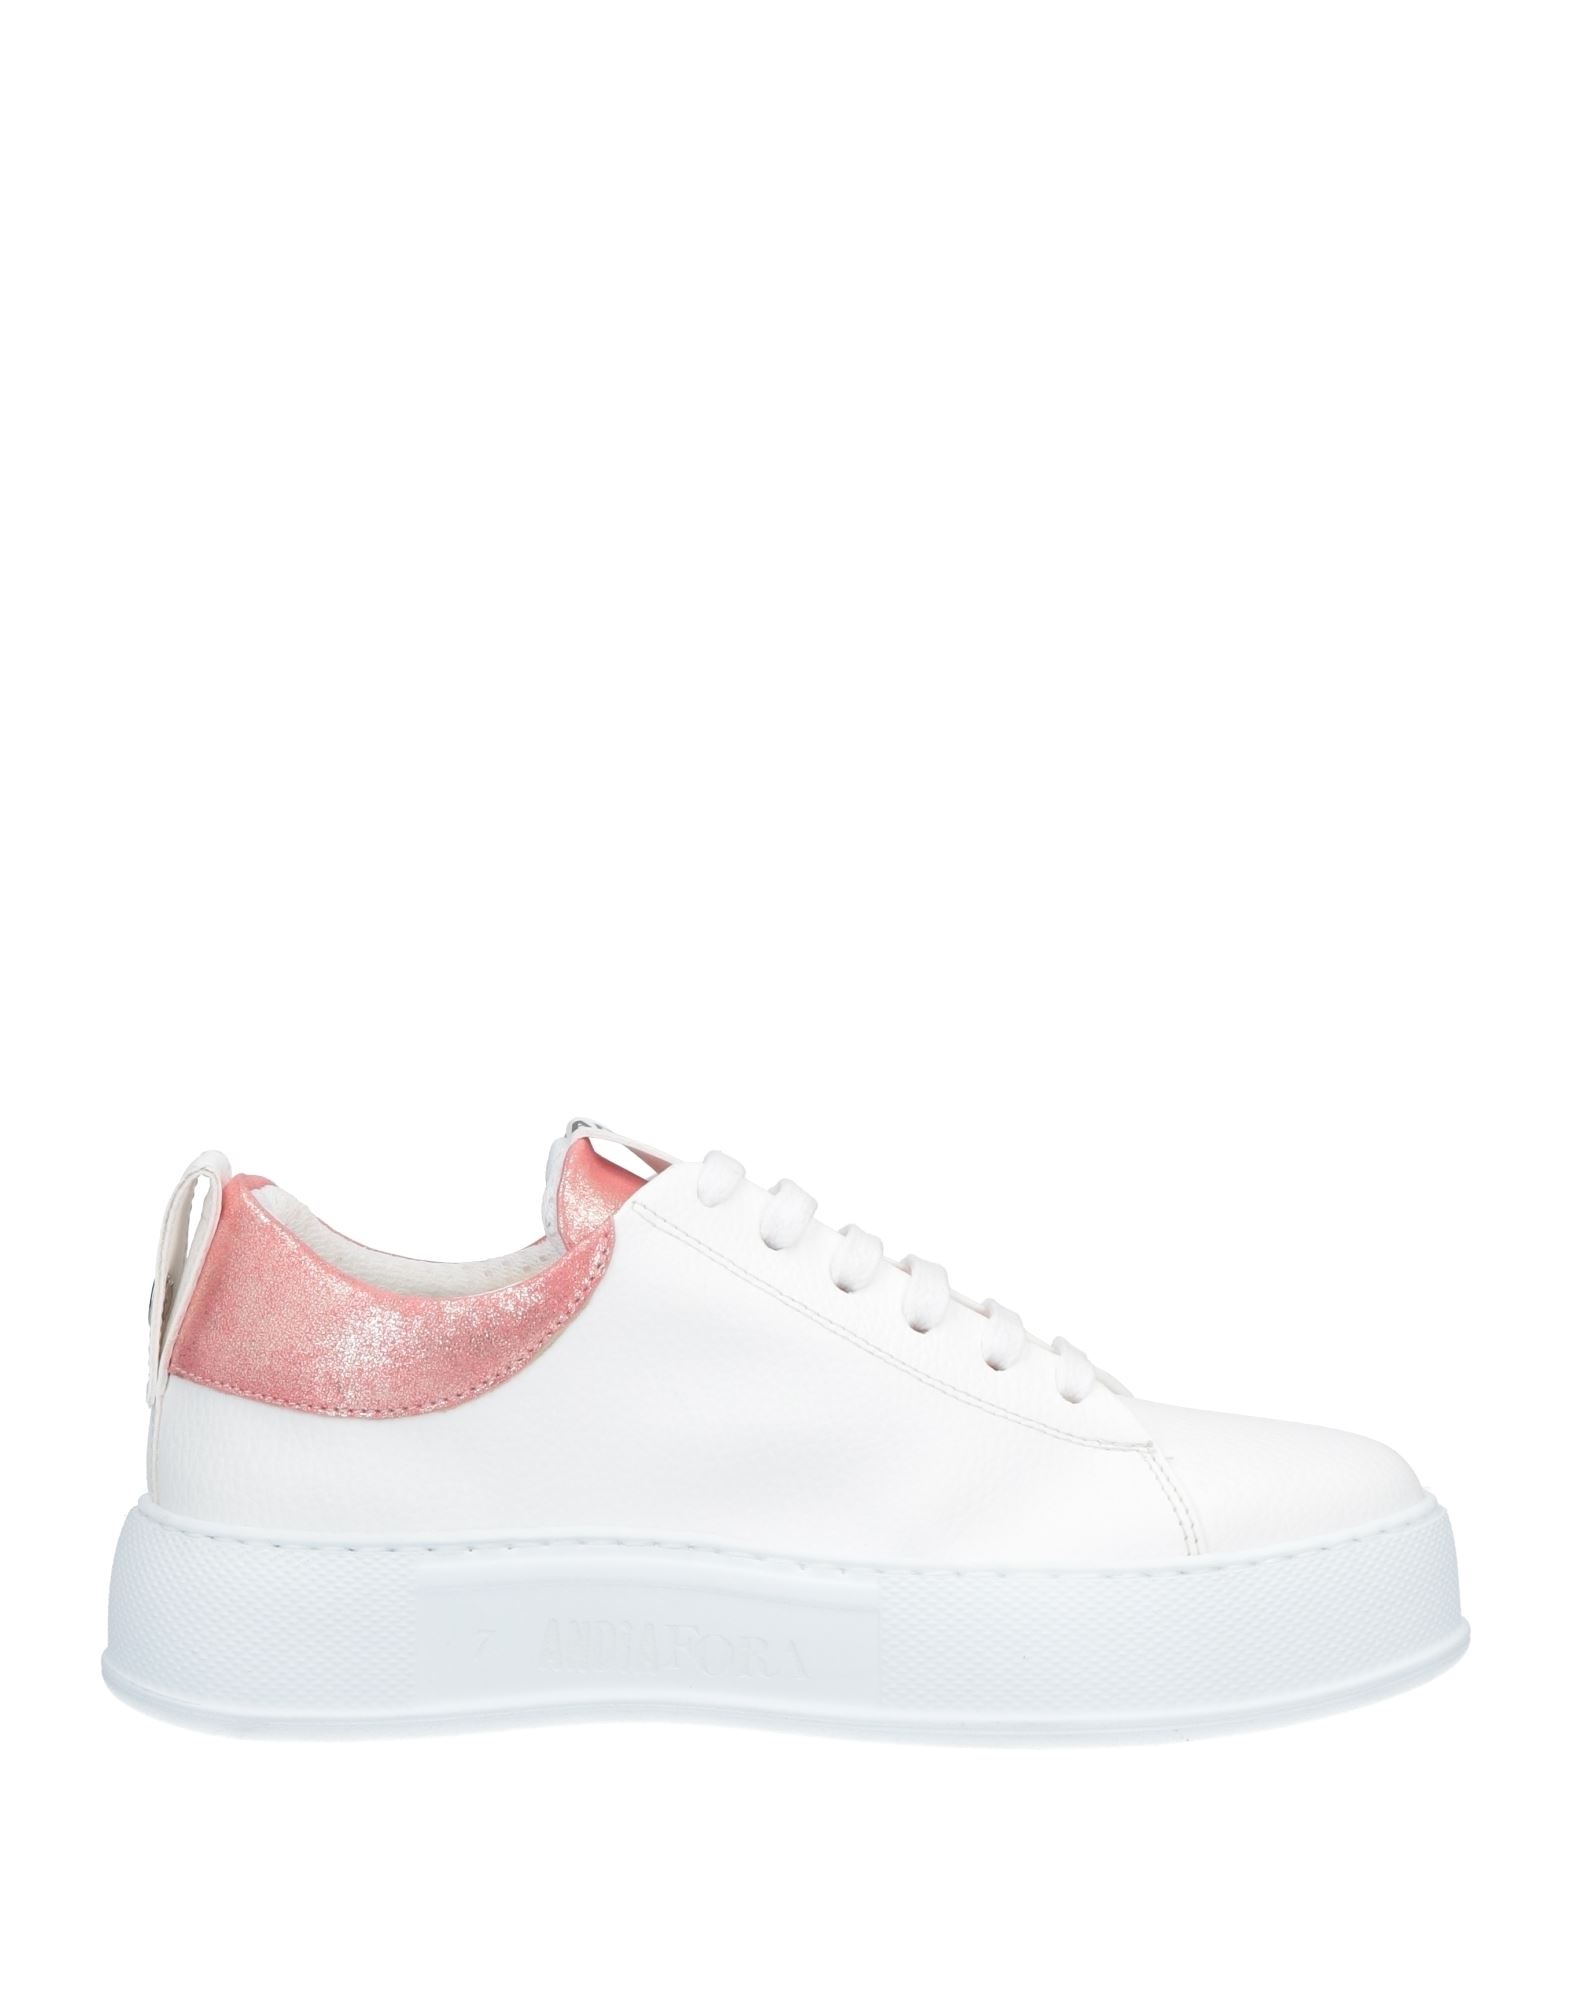 Andìa Fora Woman Sneakers White Size 5 Soft Leather In Pink